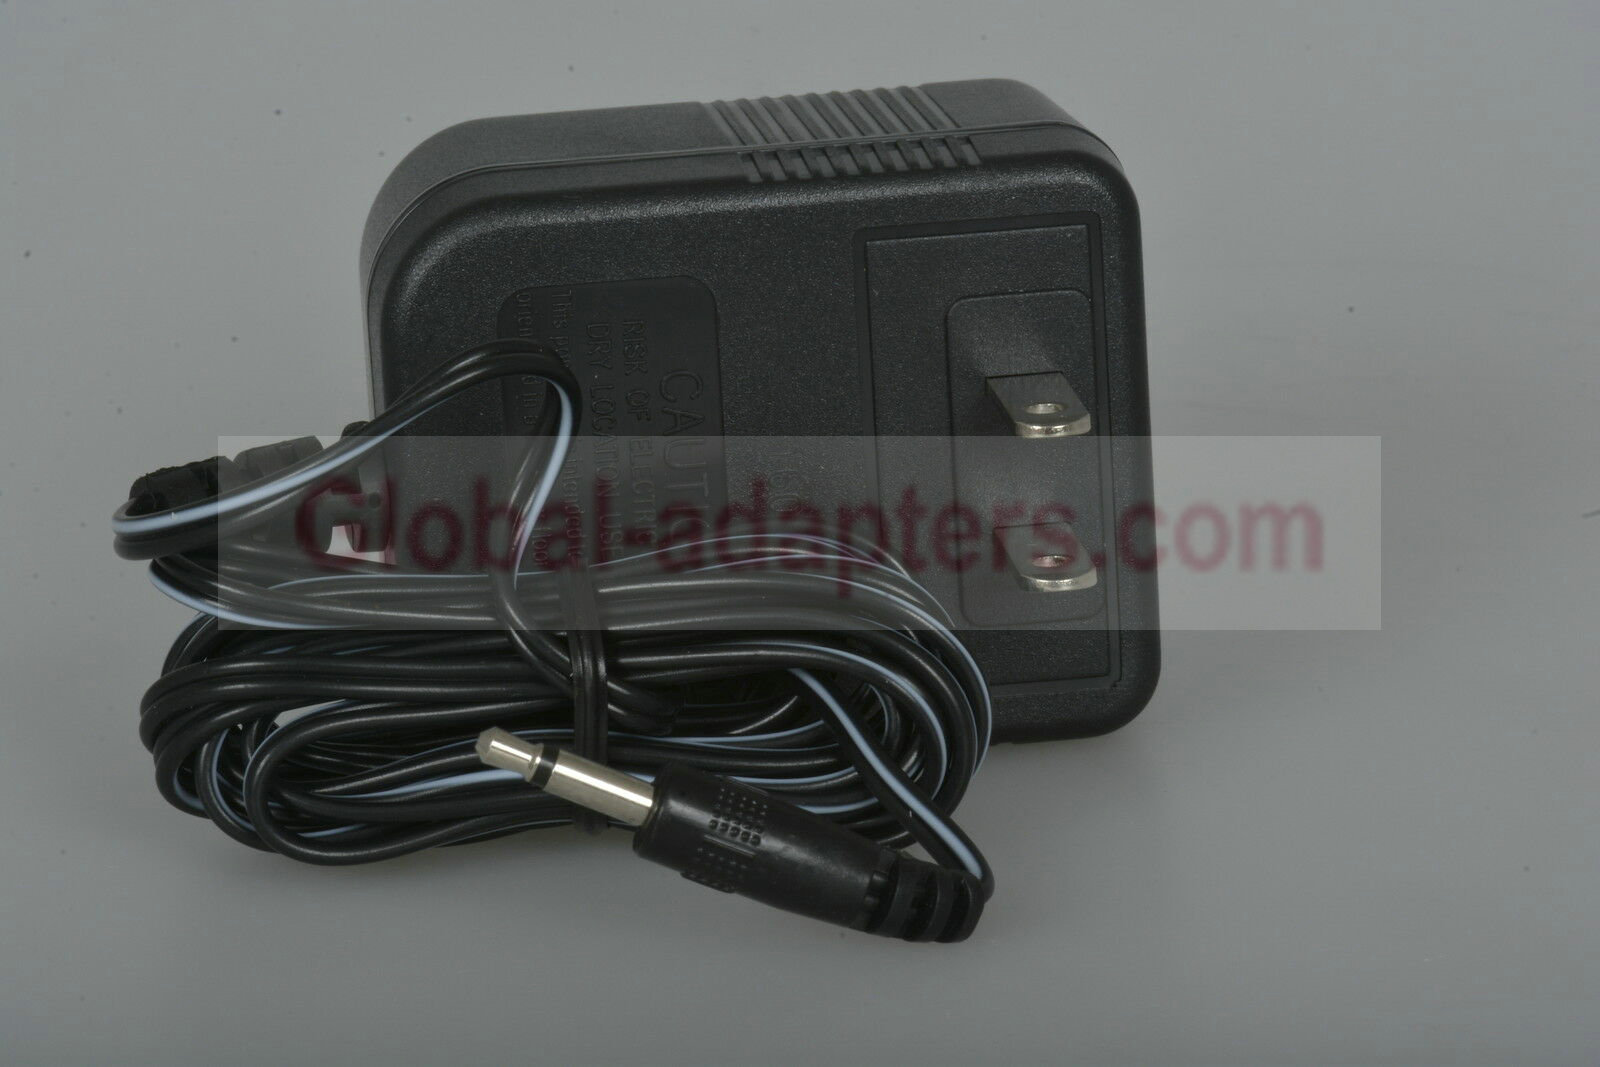 New 9V 0.5A 3.5mm DCU090050A2011 Power Supply Ac Adapter